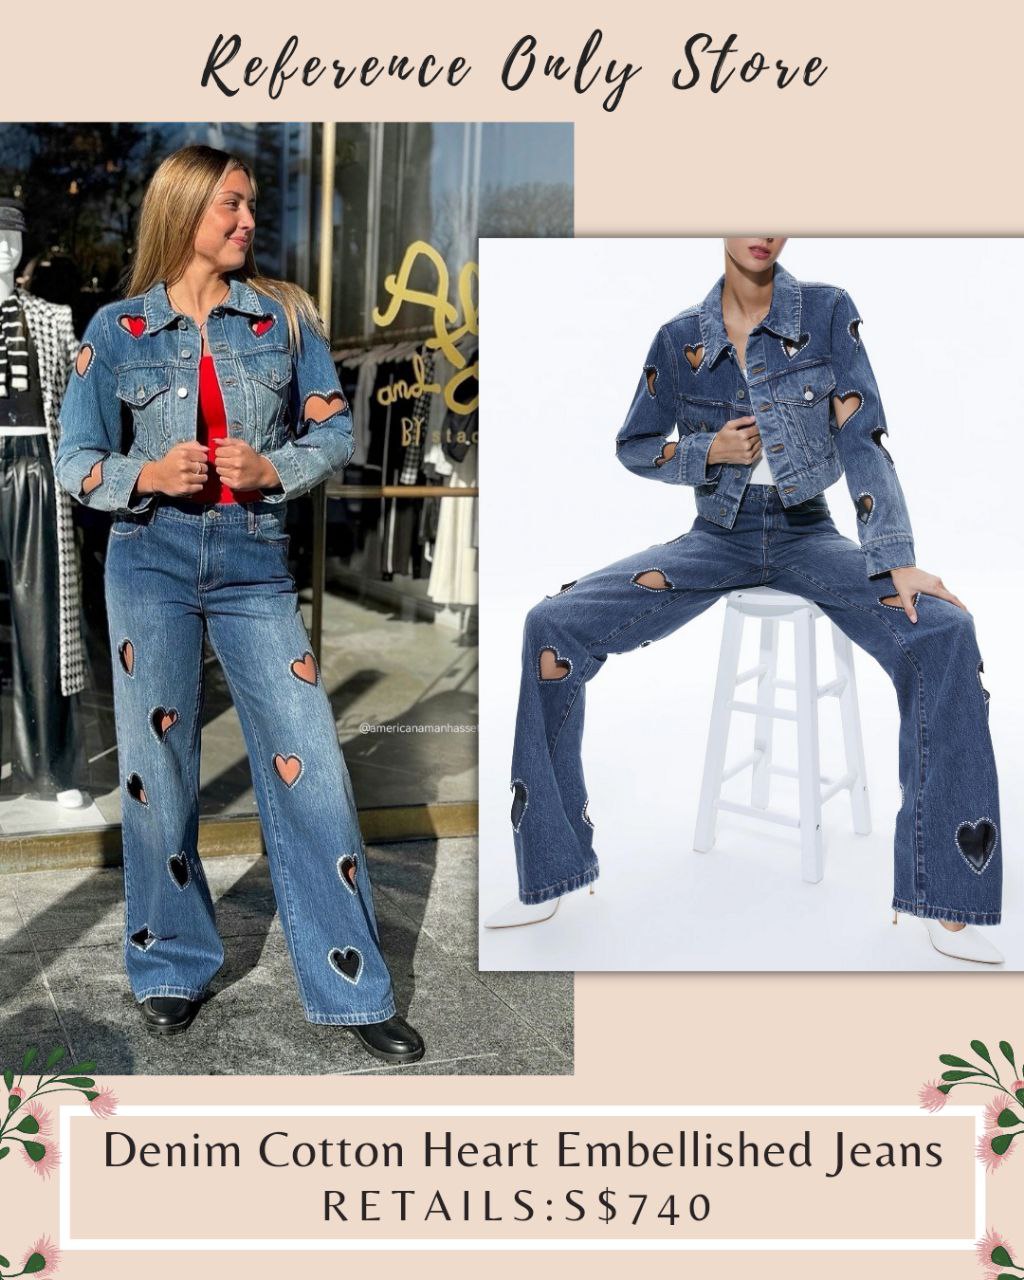 AO Cotton Heart Embellished jeans